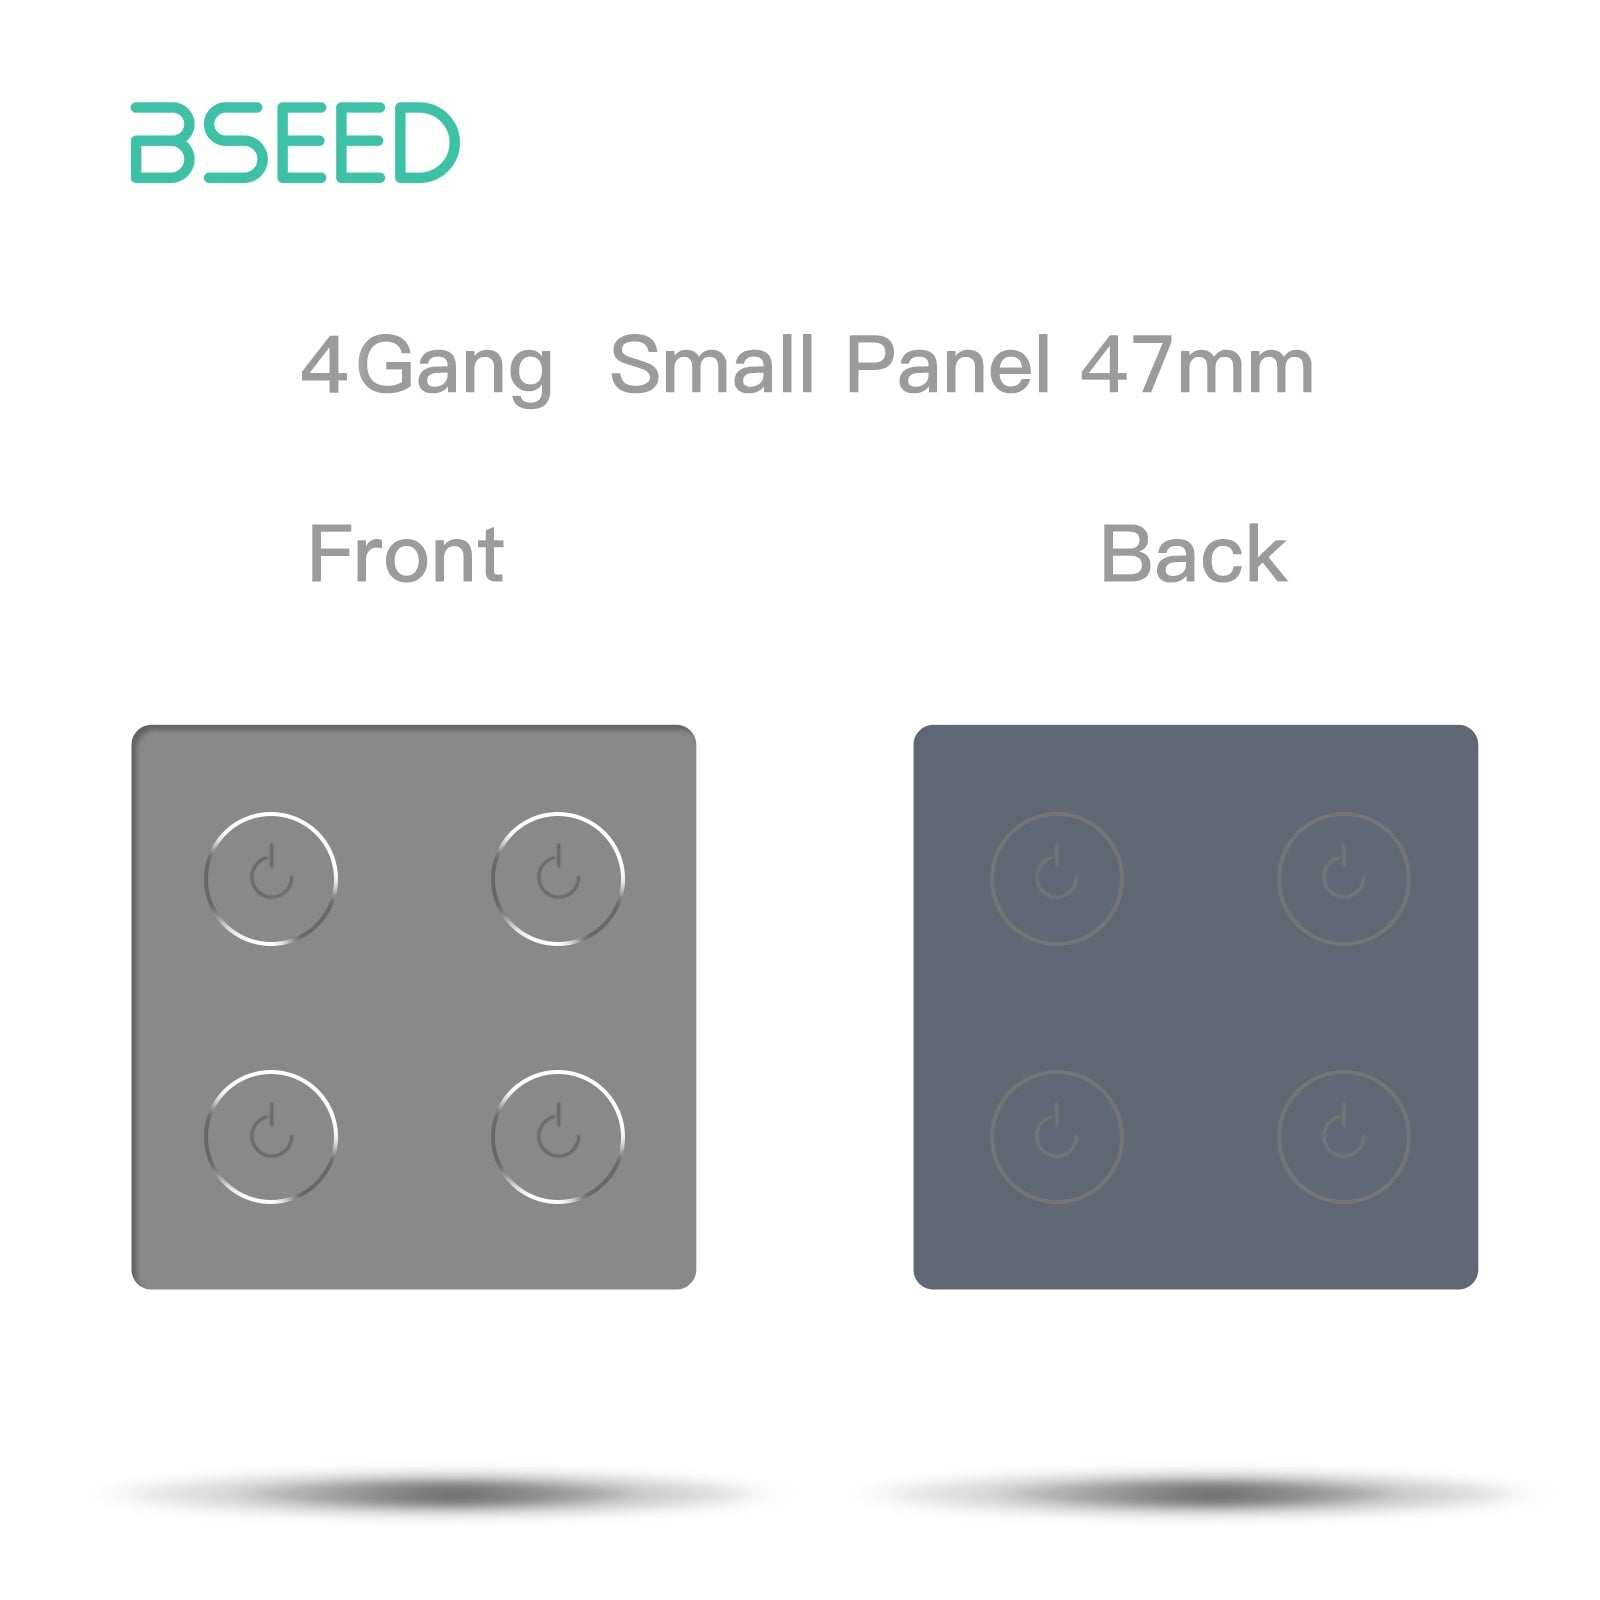 Bseed 47mm Glass Panel Switch DIY Part With Or Without Icon Bseedswitch Grey Wifi 4Gang Switch icon Panel 